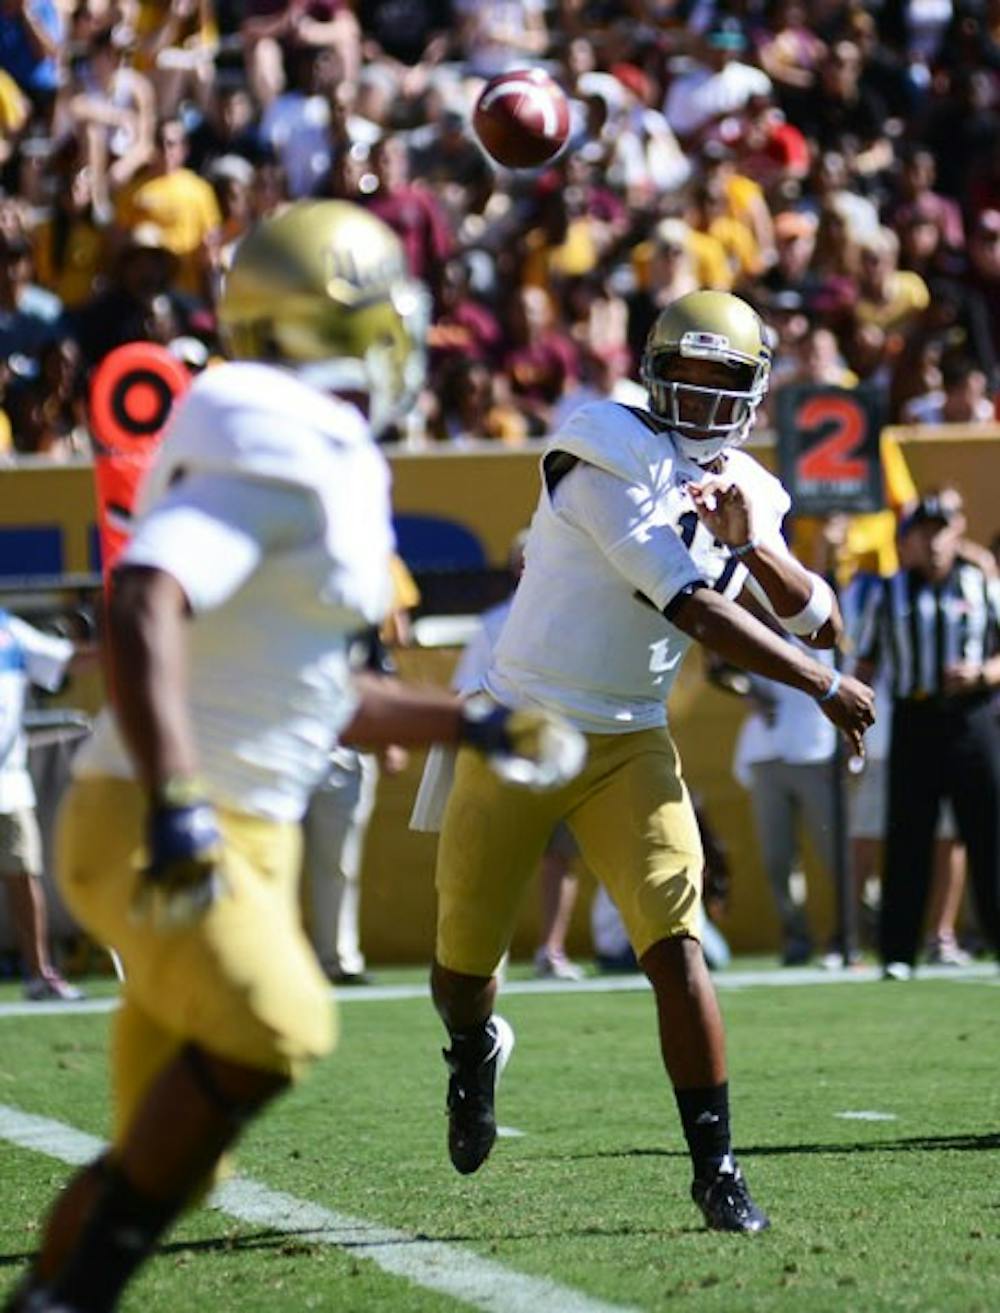 UCLA redshirt freshman quarterback Brett Hundley throws the ball to an open receiver during the Sun Devils' 45-43 loss to the Bruins on Saturday. (Photo by Aaron Lavinsky)